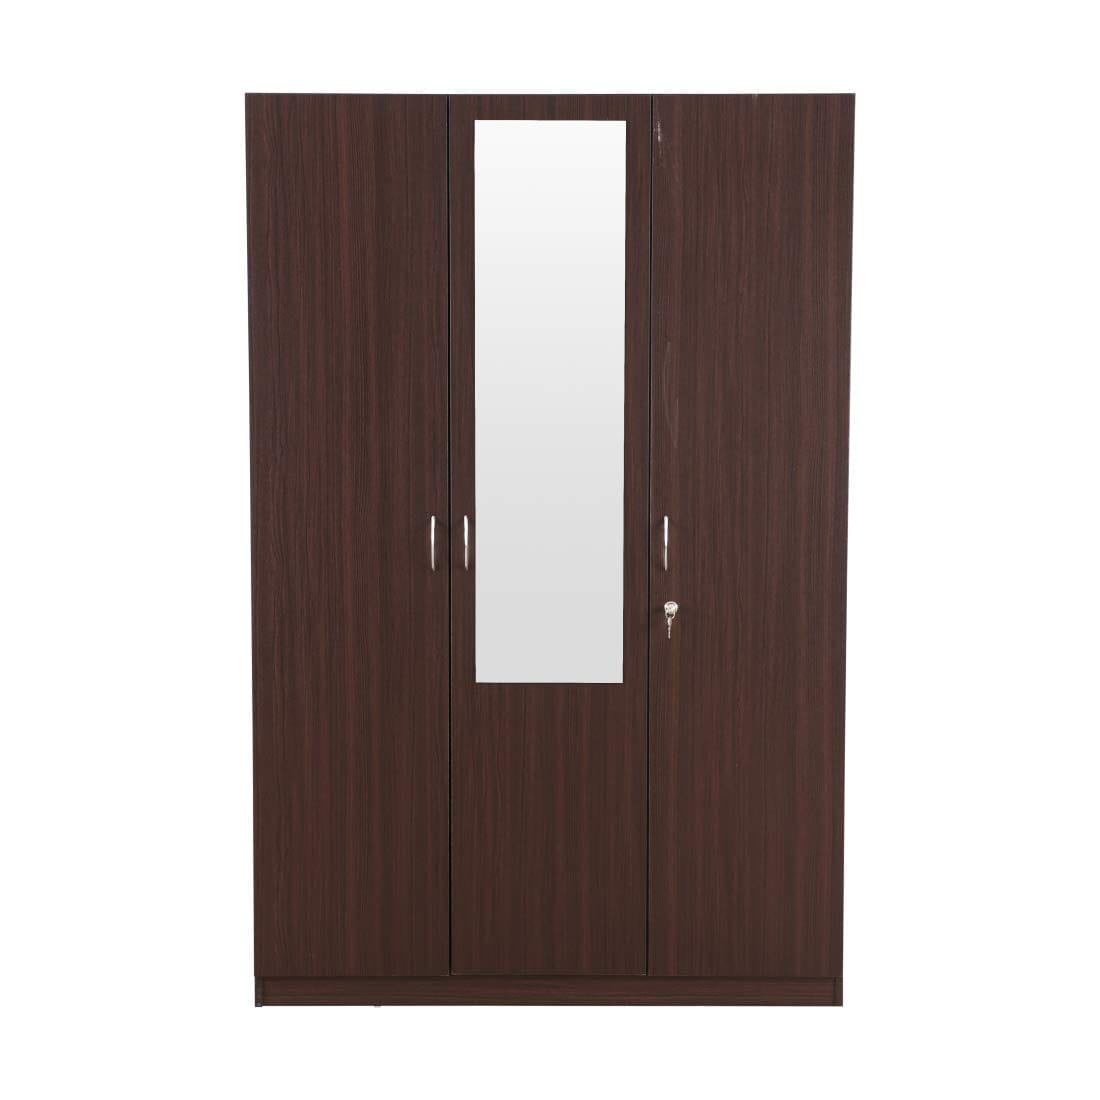 Walnut Colour 3 Door Wardrobe with Mirror,Drawer, Shelves and Hanging Space for Clothes | Wardrobe for Clothes | Cupboard | Almirah